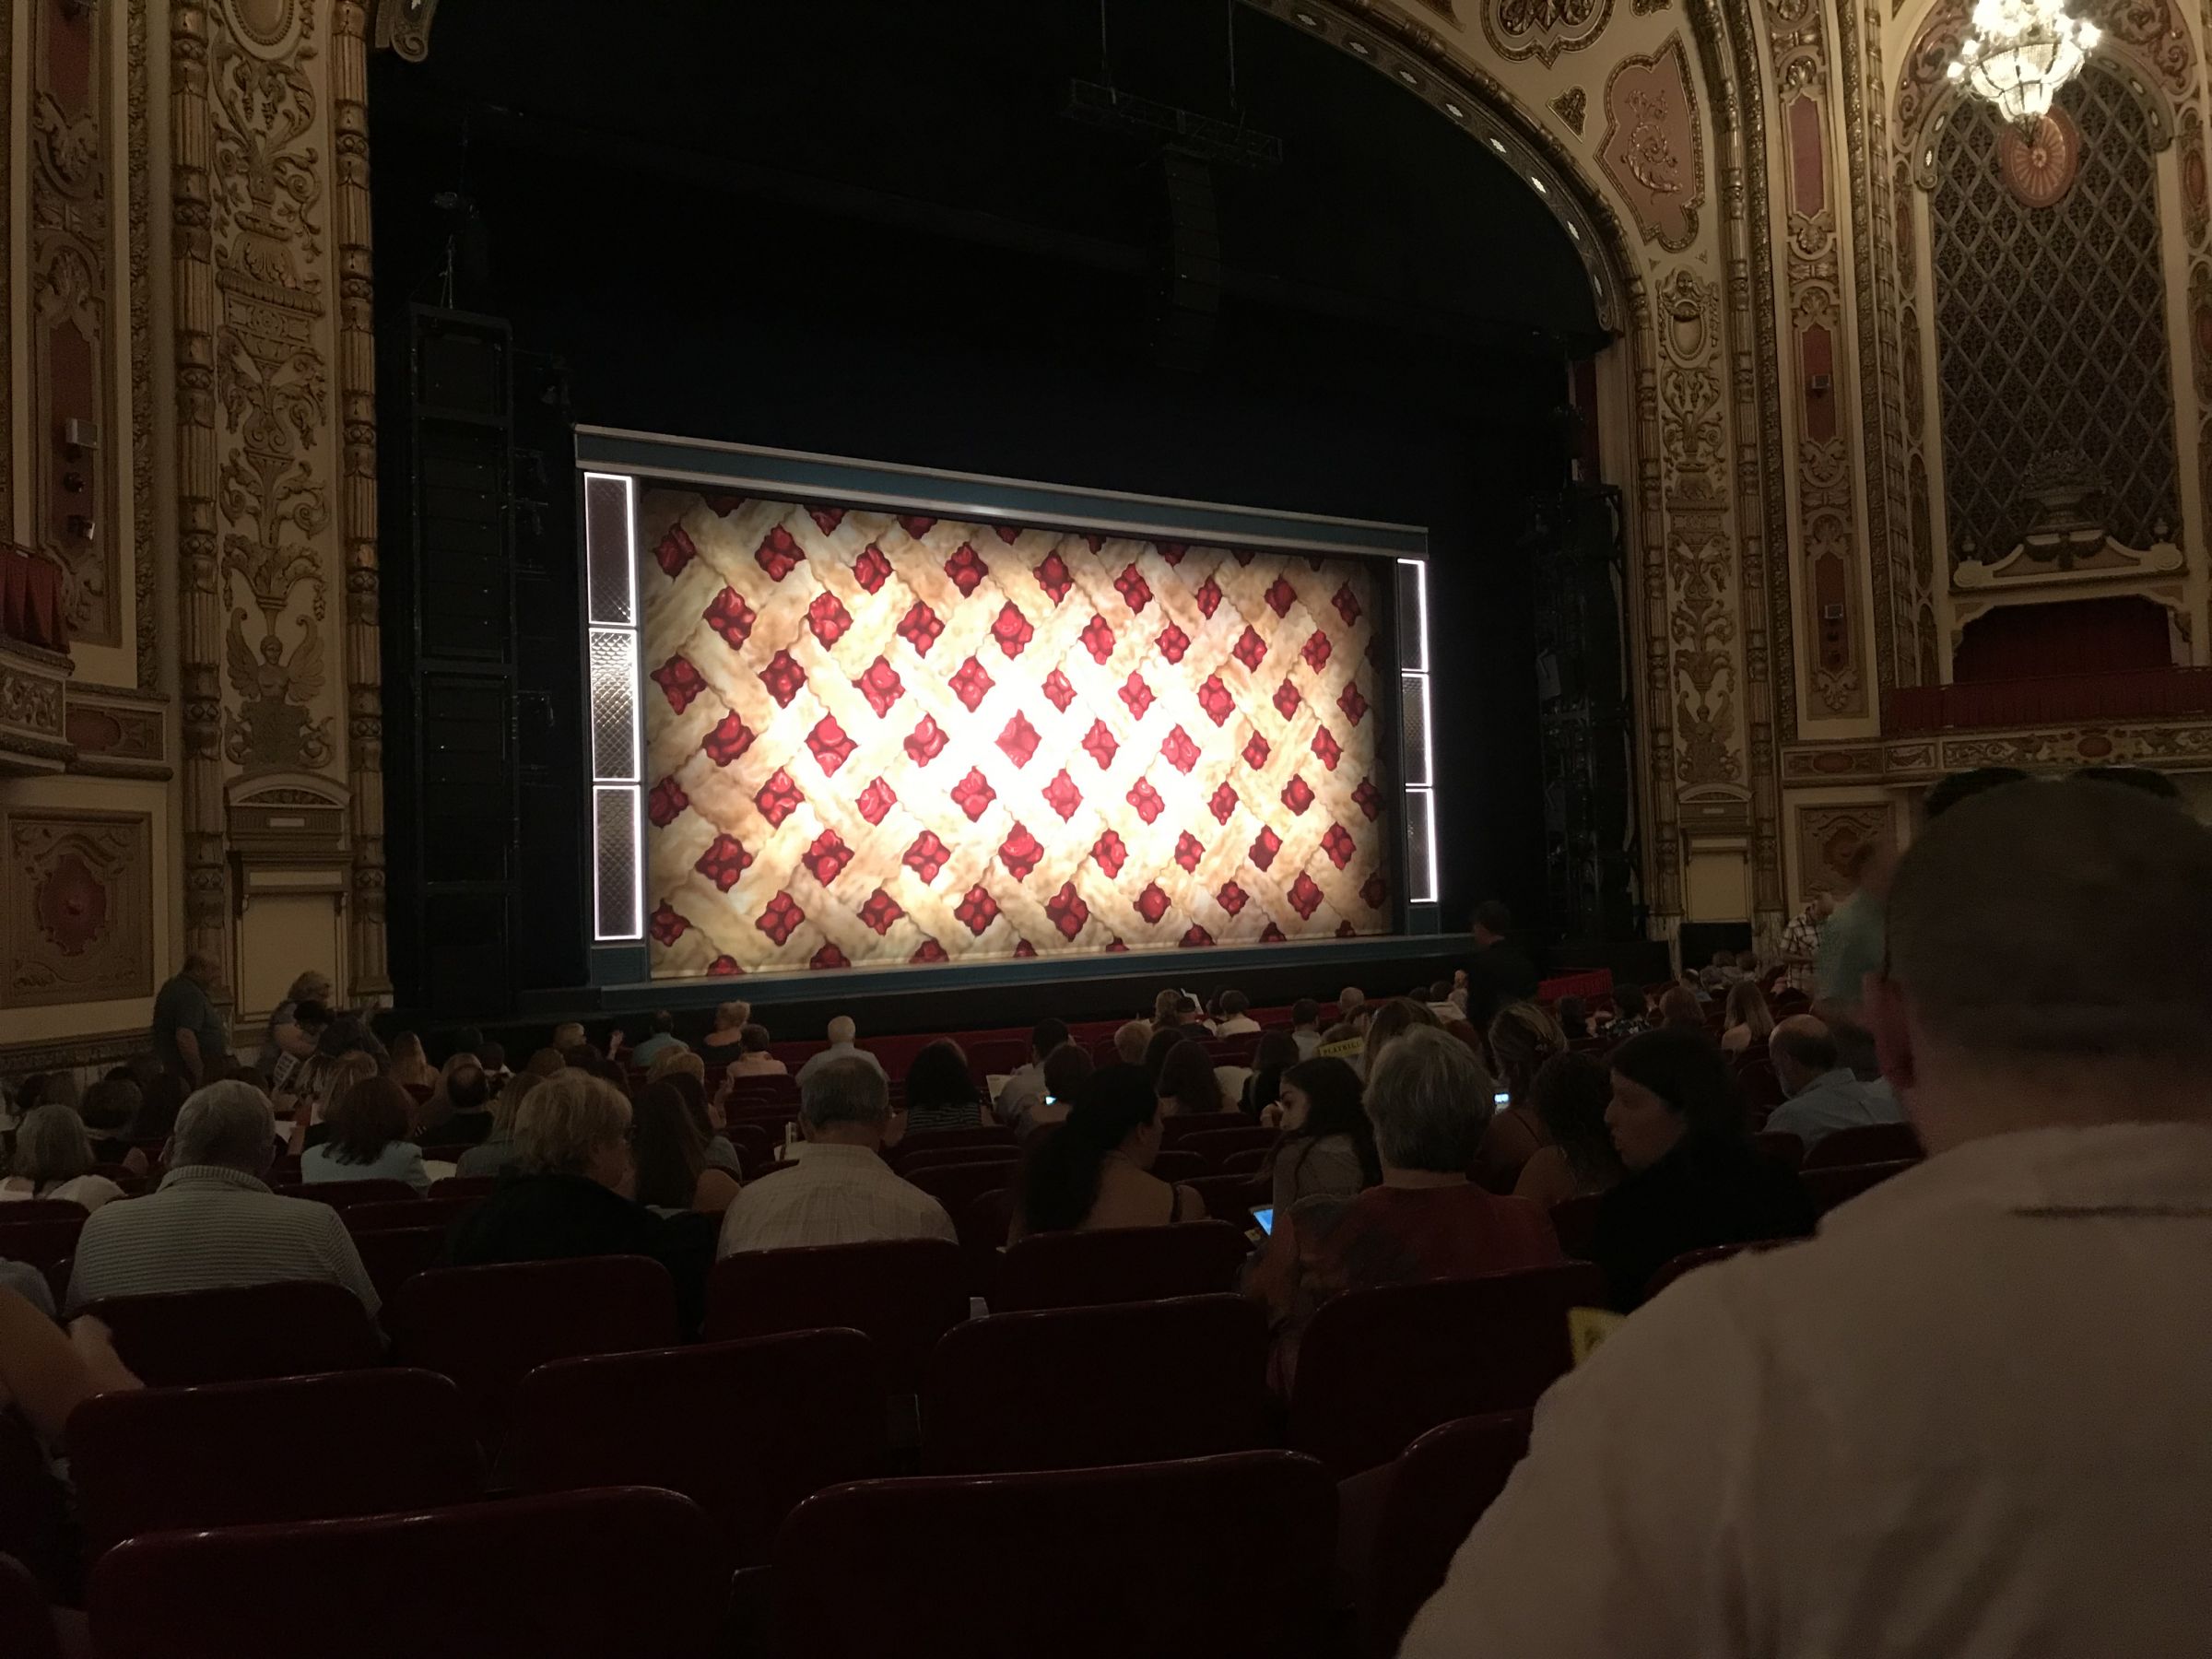 orchestra left, row r seat view  - cadillac palace theatre